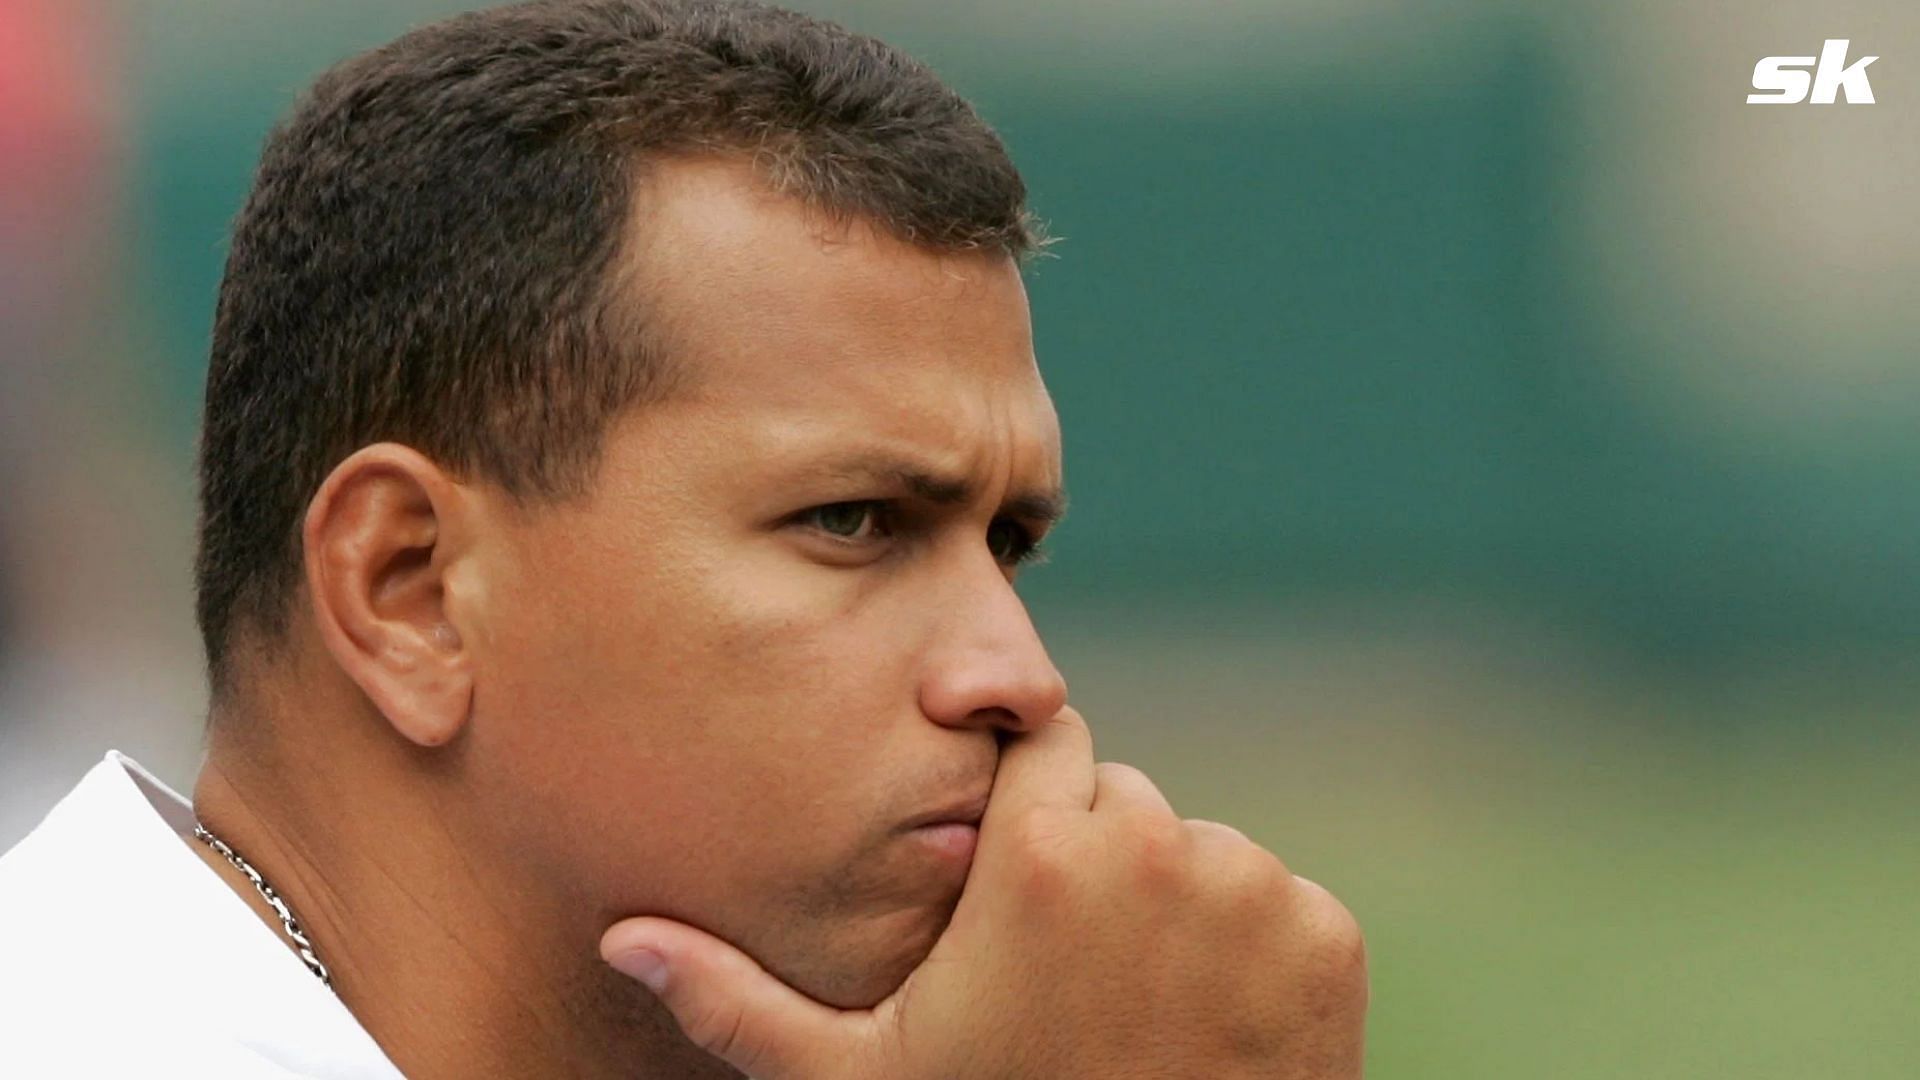 When Alex Rodriguez acknowledged using PEDs recklessly during his storied career; feared losing his spot in the HOF